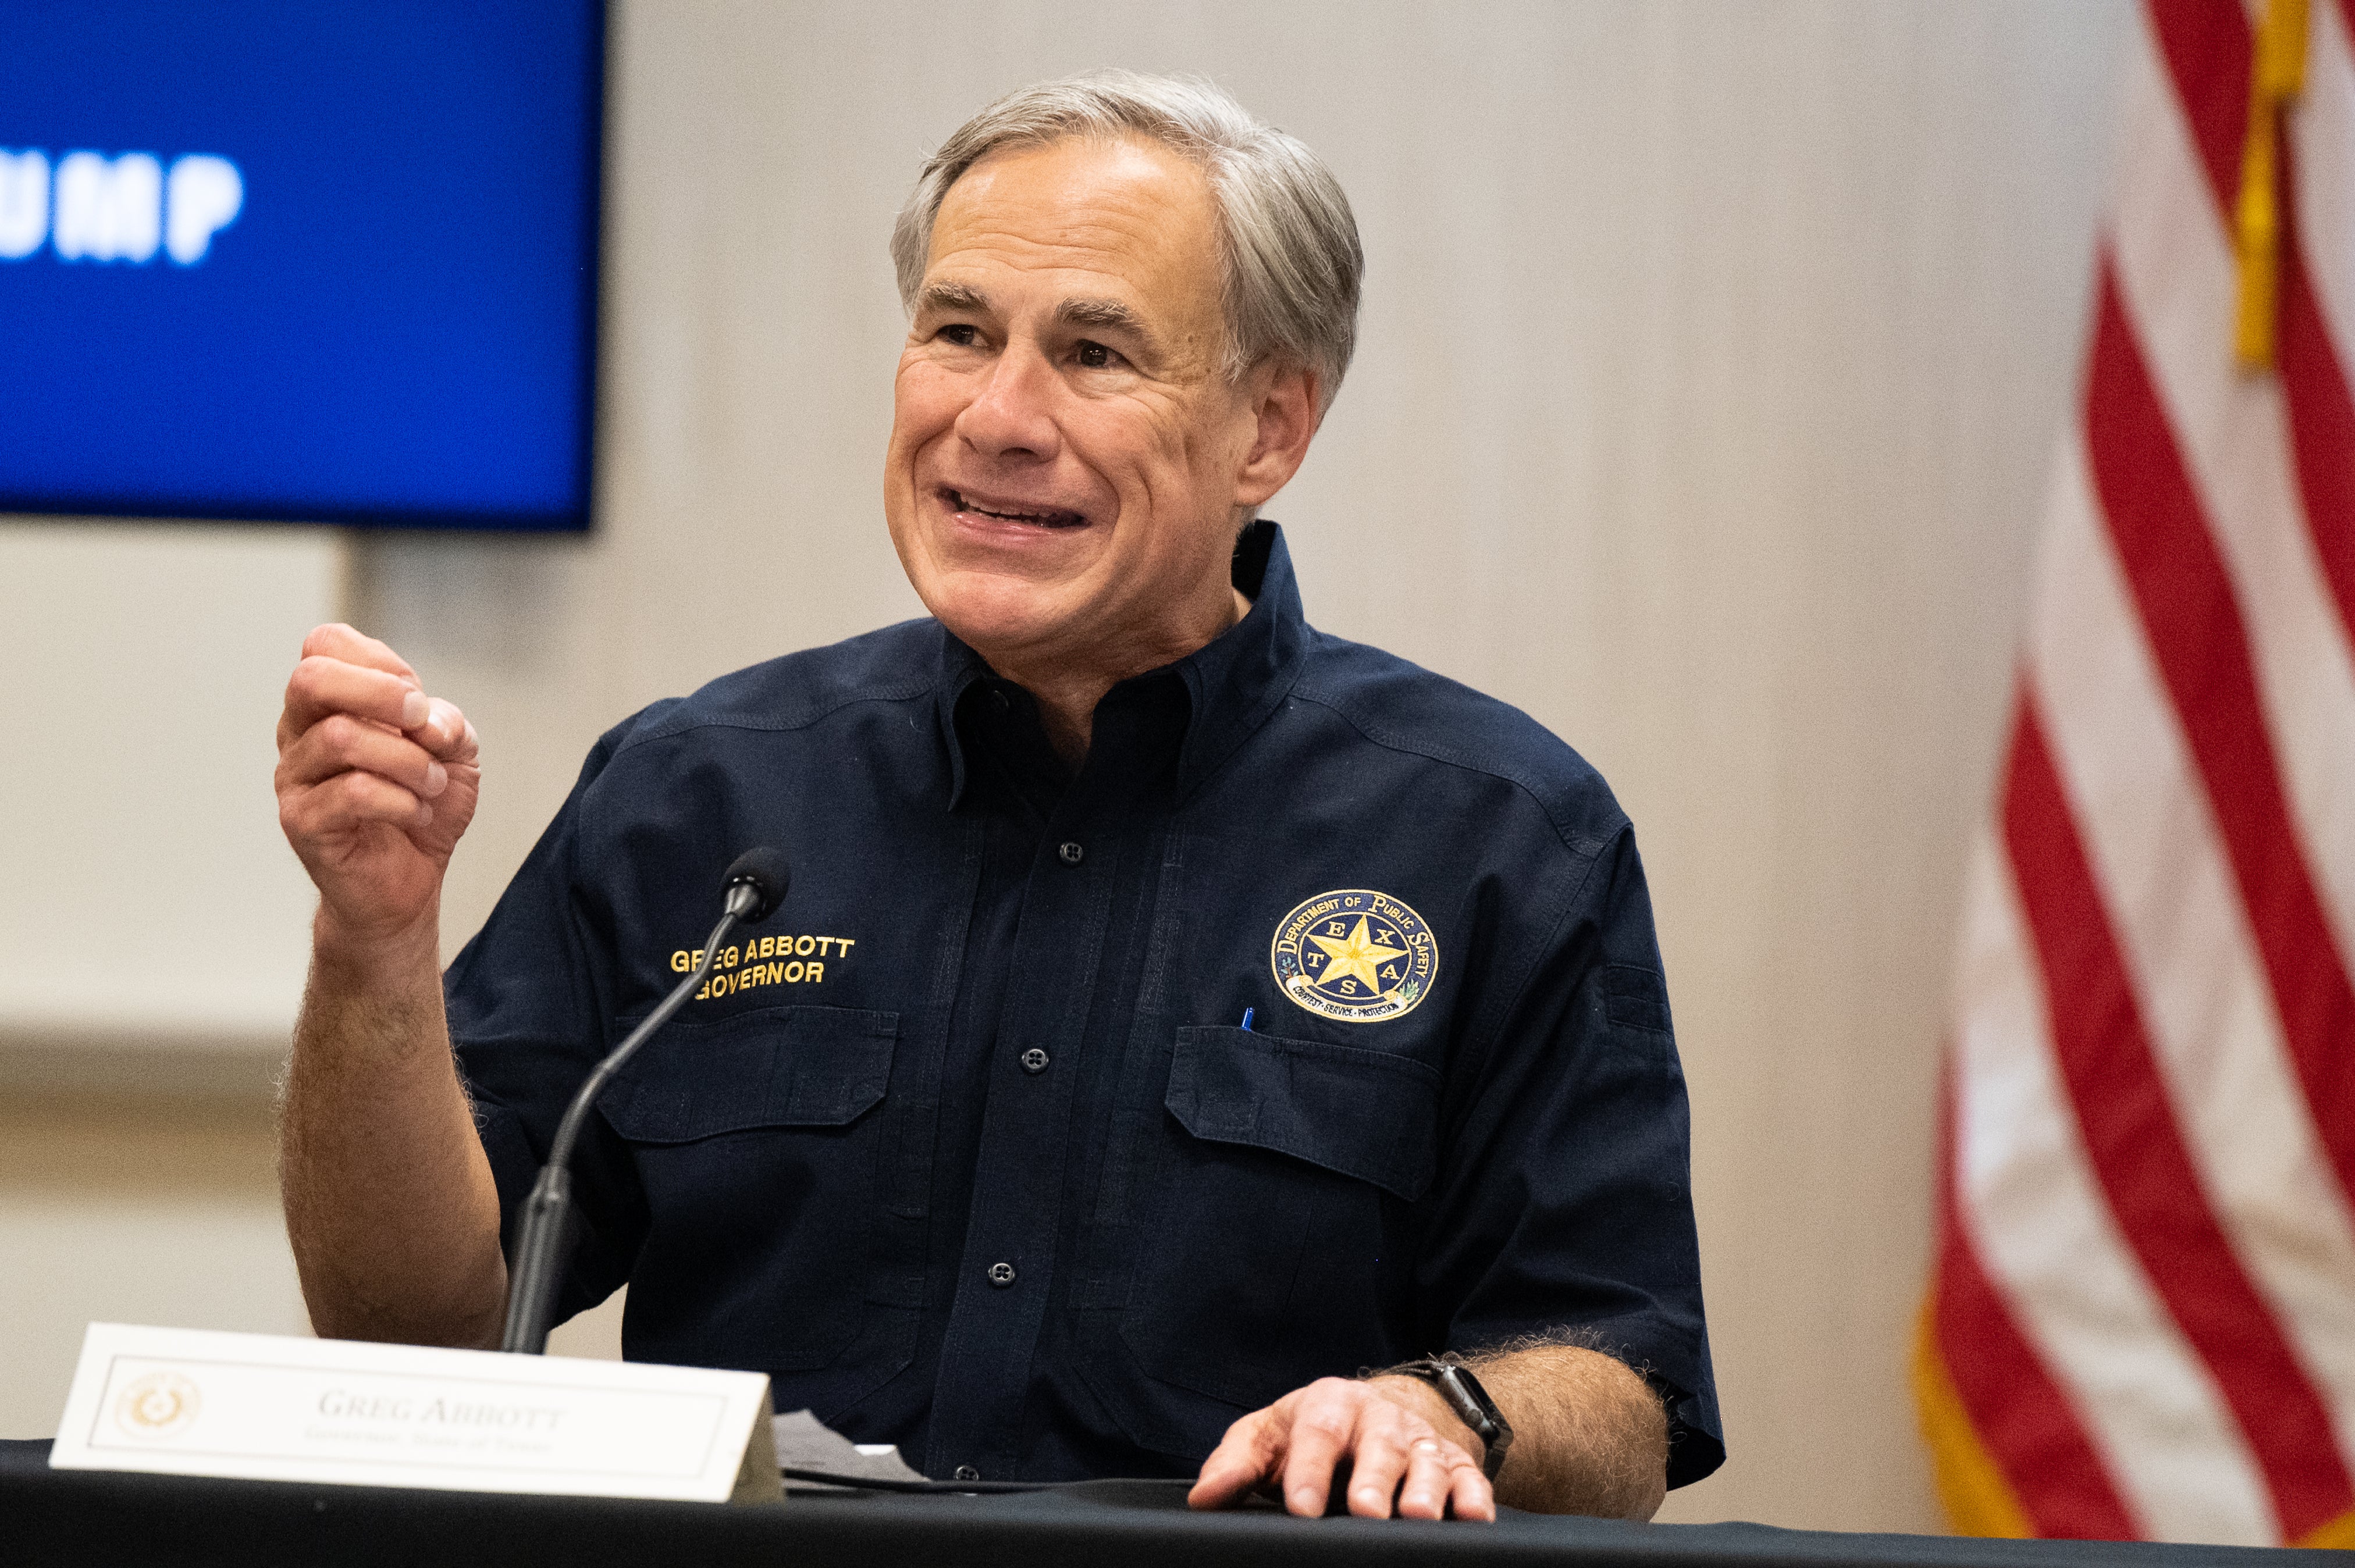 Some believe Greg Abbott could be among GOP hopefuls for the White House in 2024